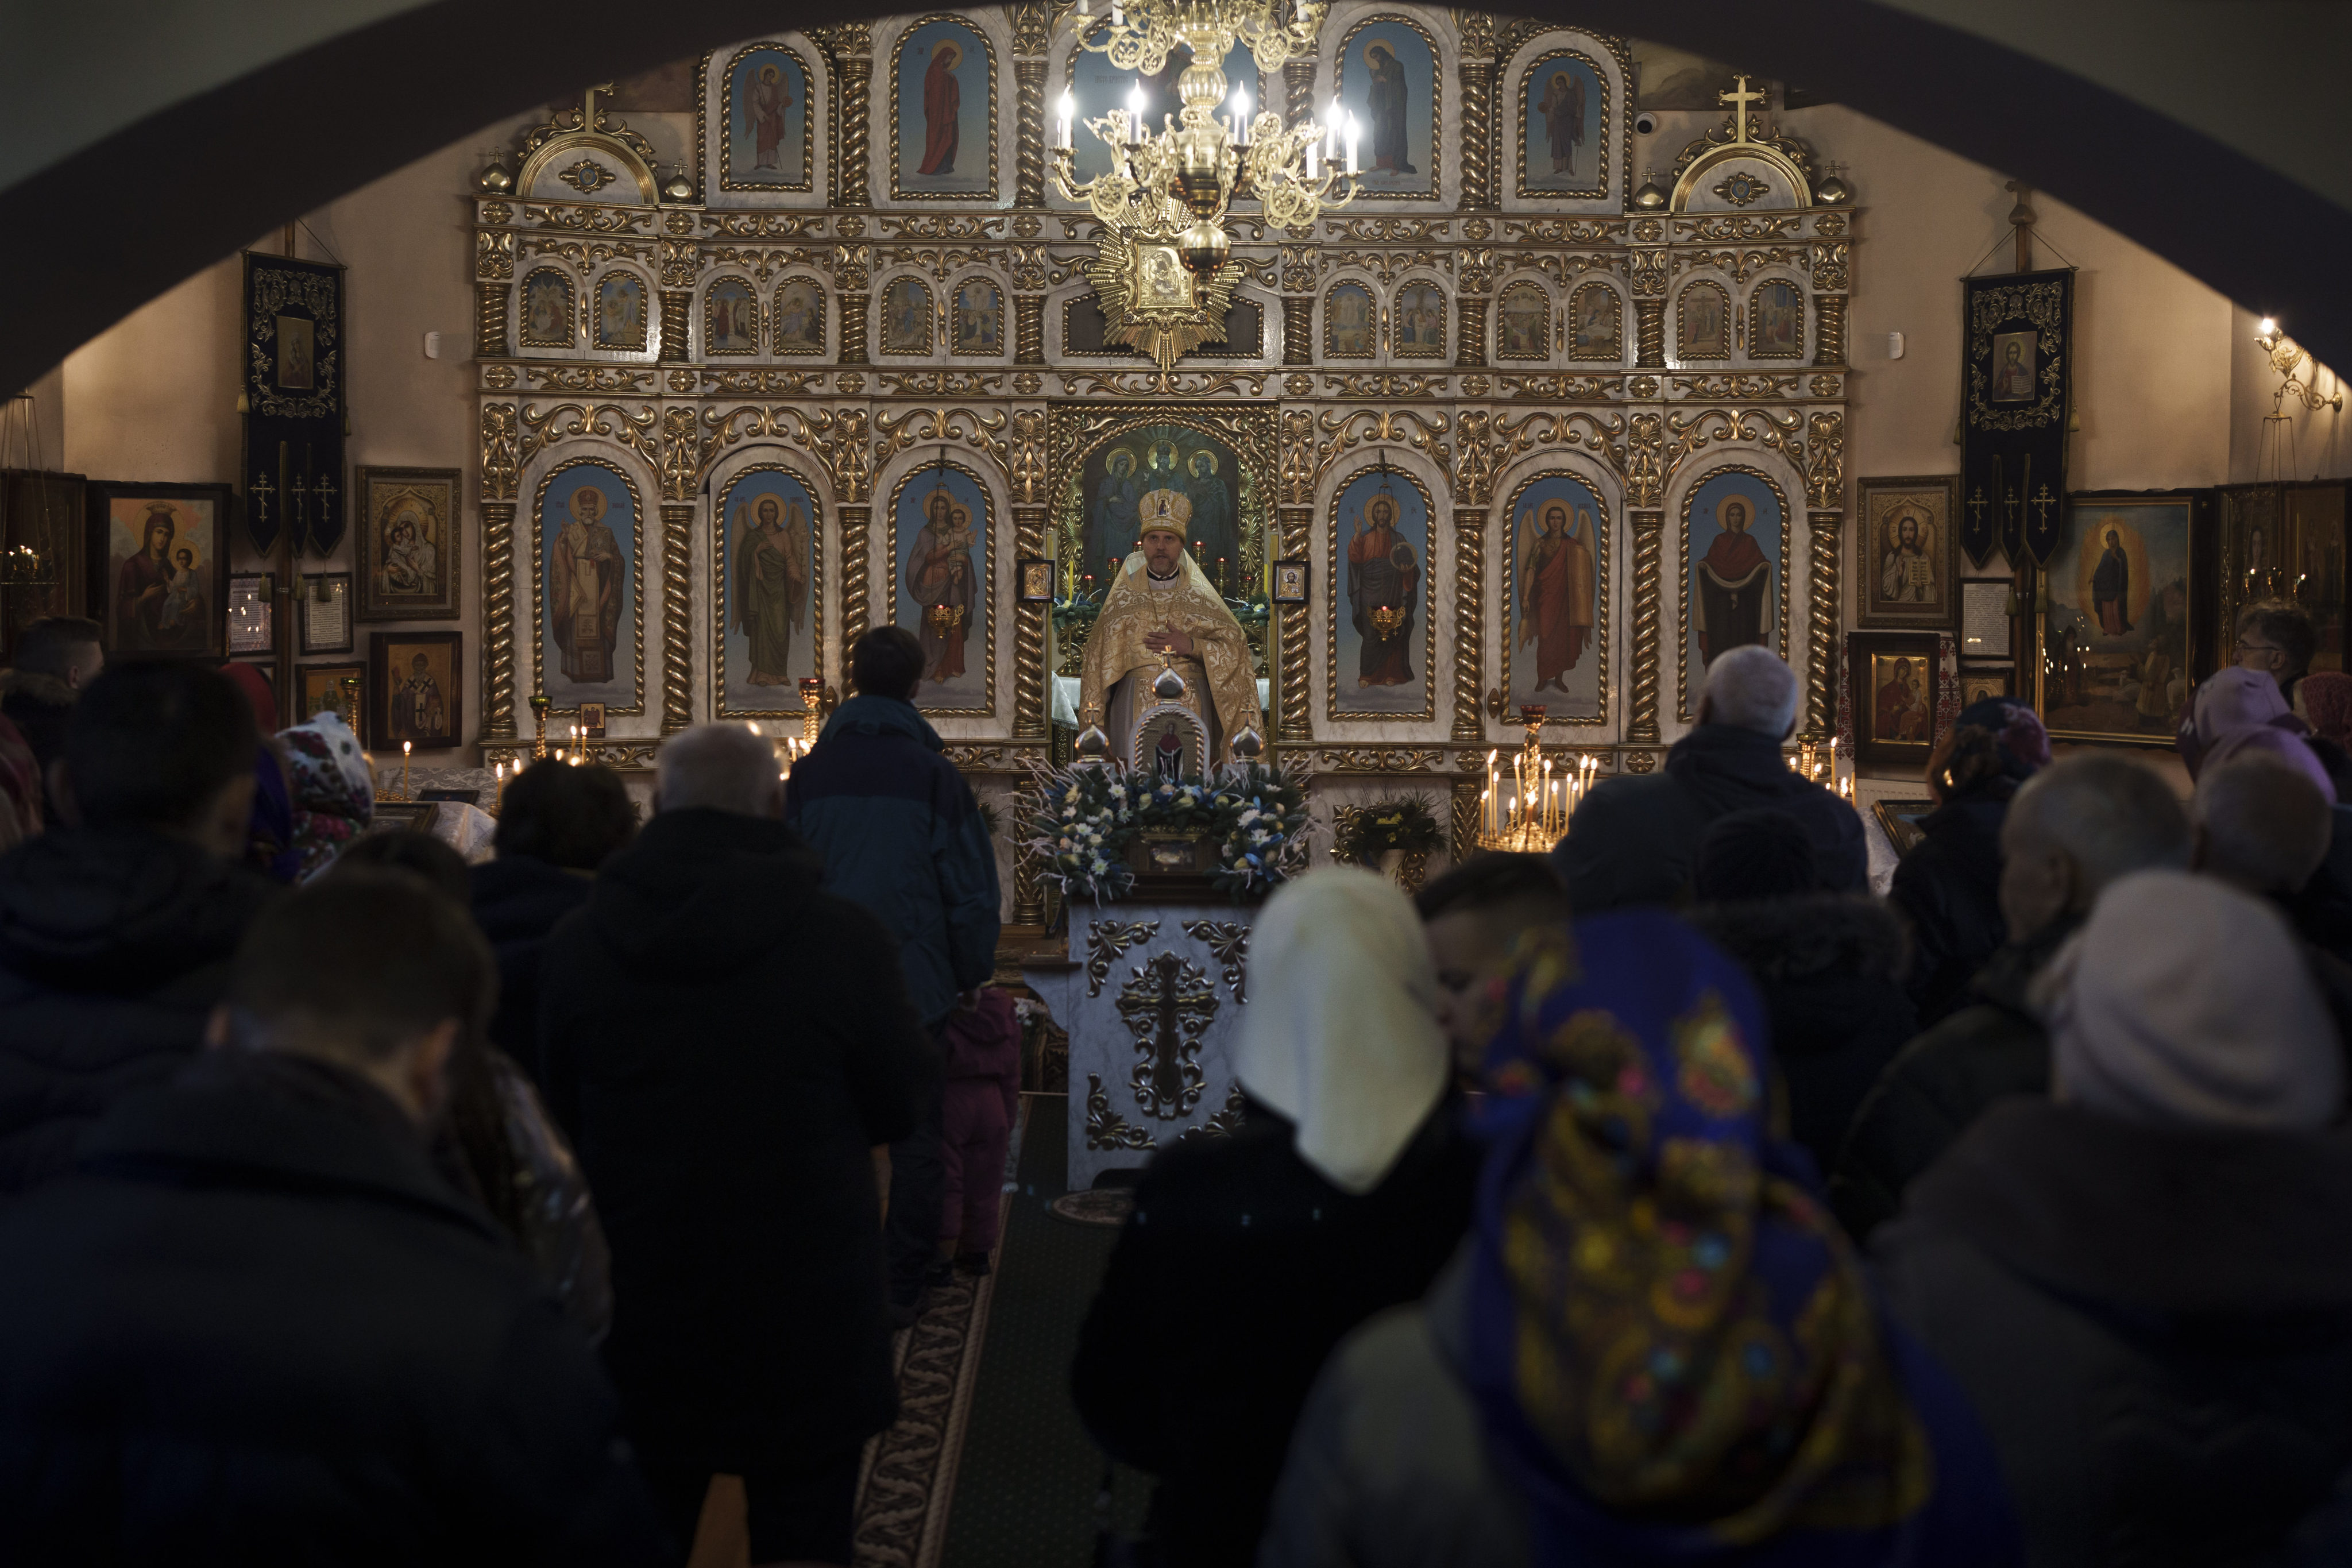 Ukrainians attend a Christmas mass at an Orthodox Church in Bobrytsia, Kyiv, Ukraine. Volodymyr Zelensky on Friday signed a law moving the official Christmas Day holiday to December 25 from January 7, the day when the Russian Orthodox Church observes it. Photo: AP